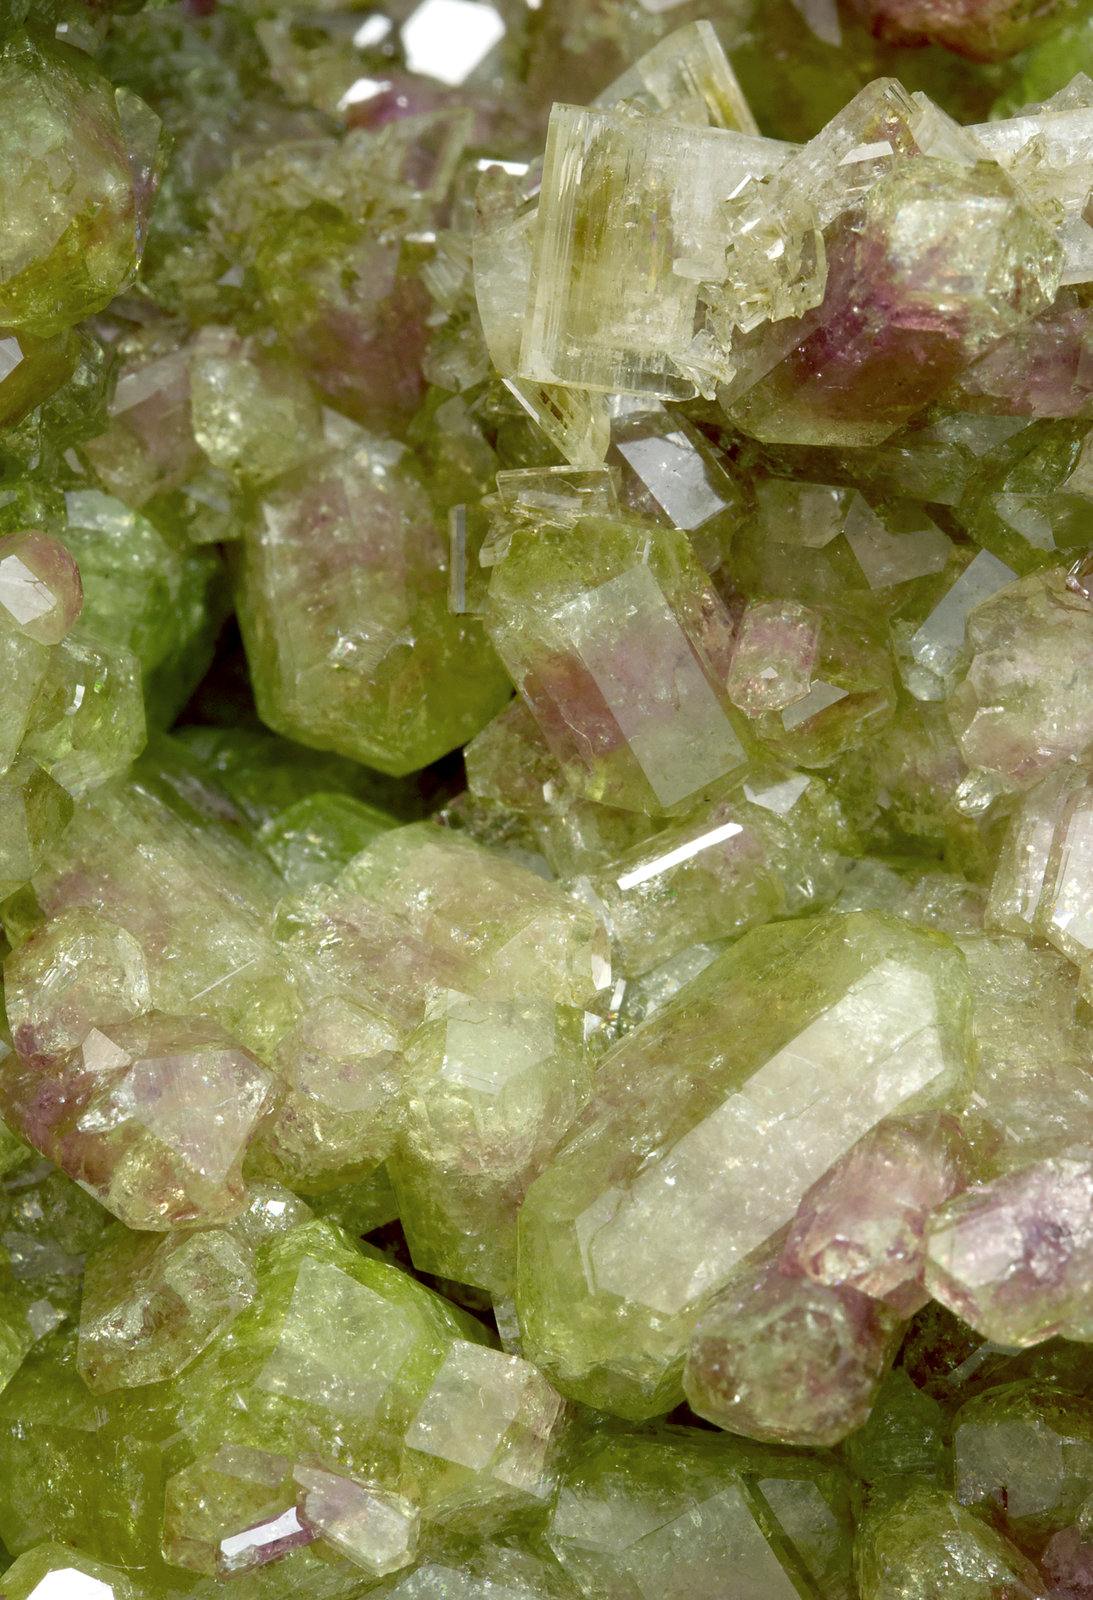 specimens/s_imagesY0/Diopside-MH90Y0d2.jpg